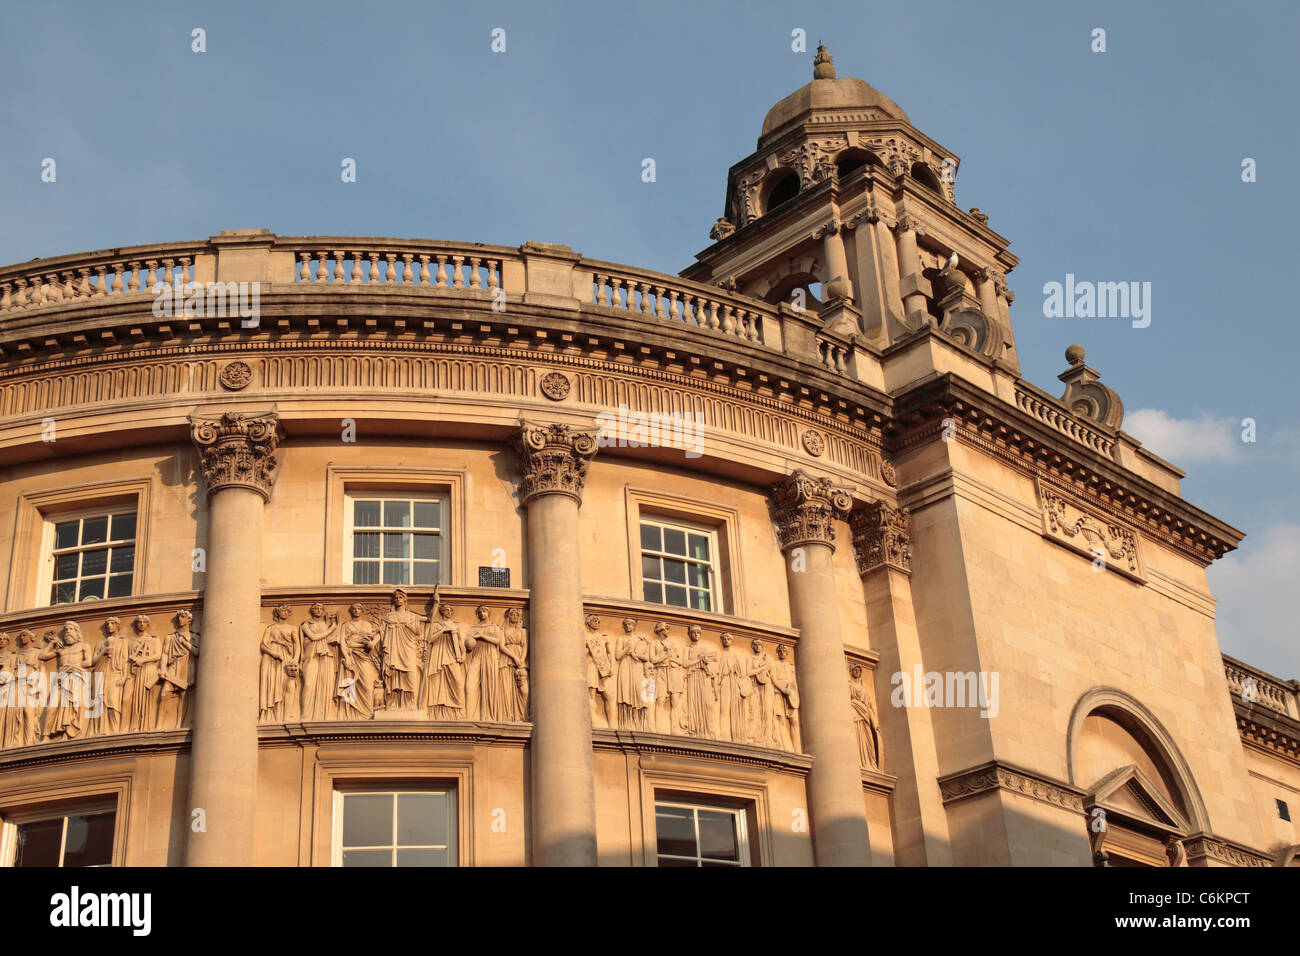 VIew of the front facade of the Victoria Art Gallery Bath, UK. Stock Photo